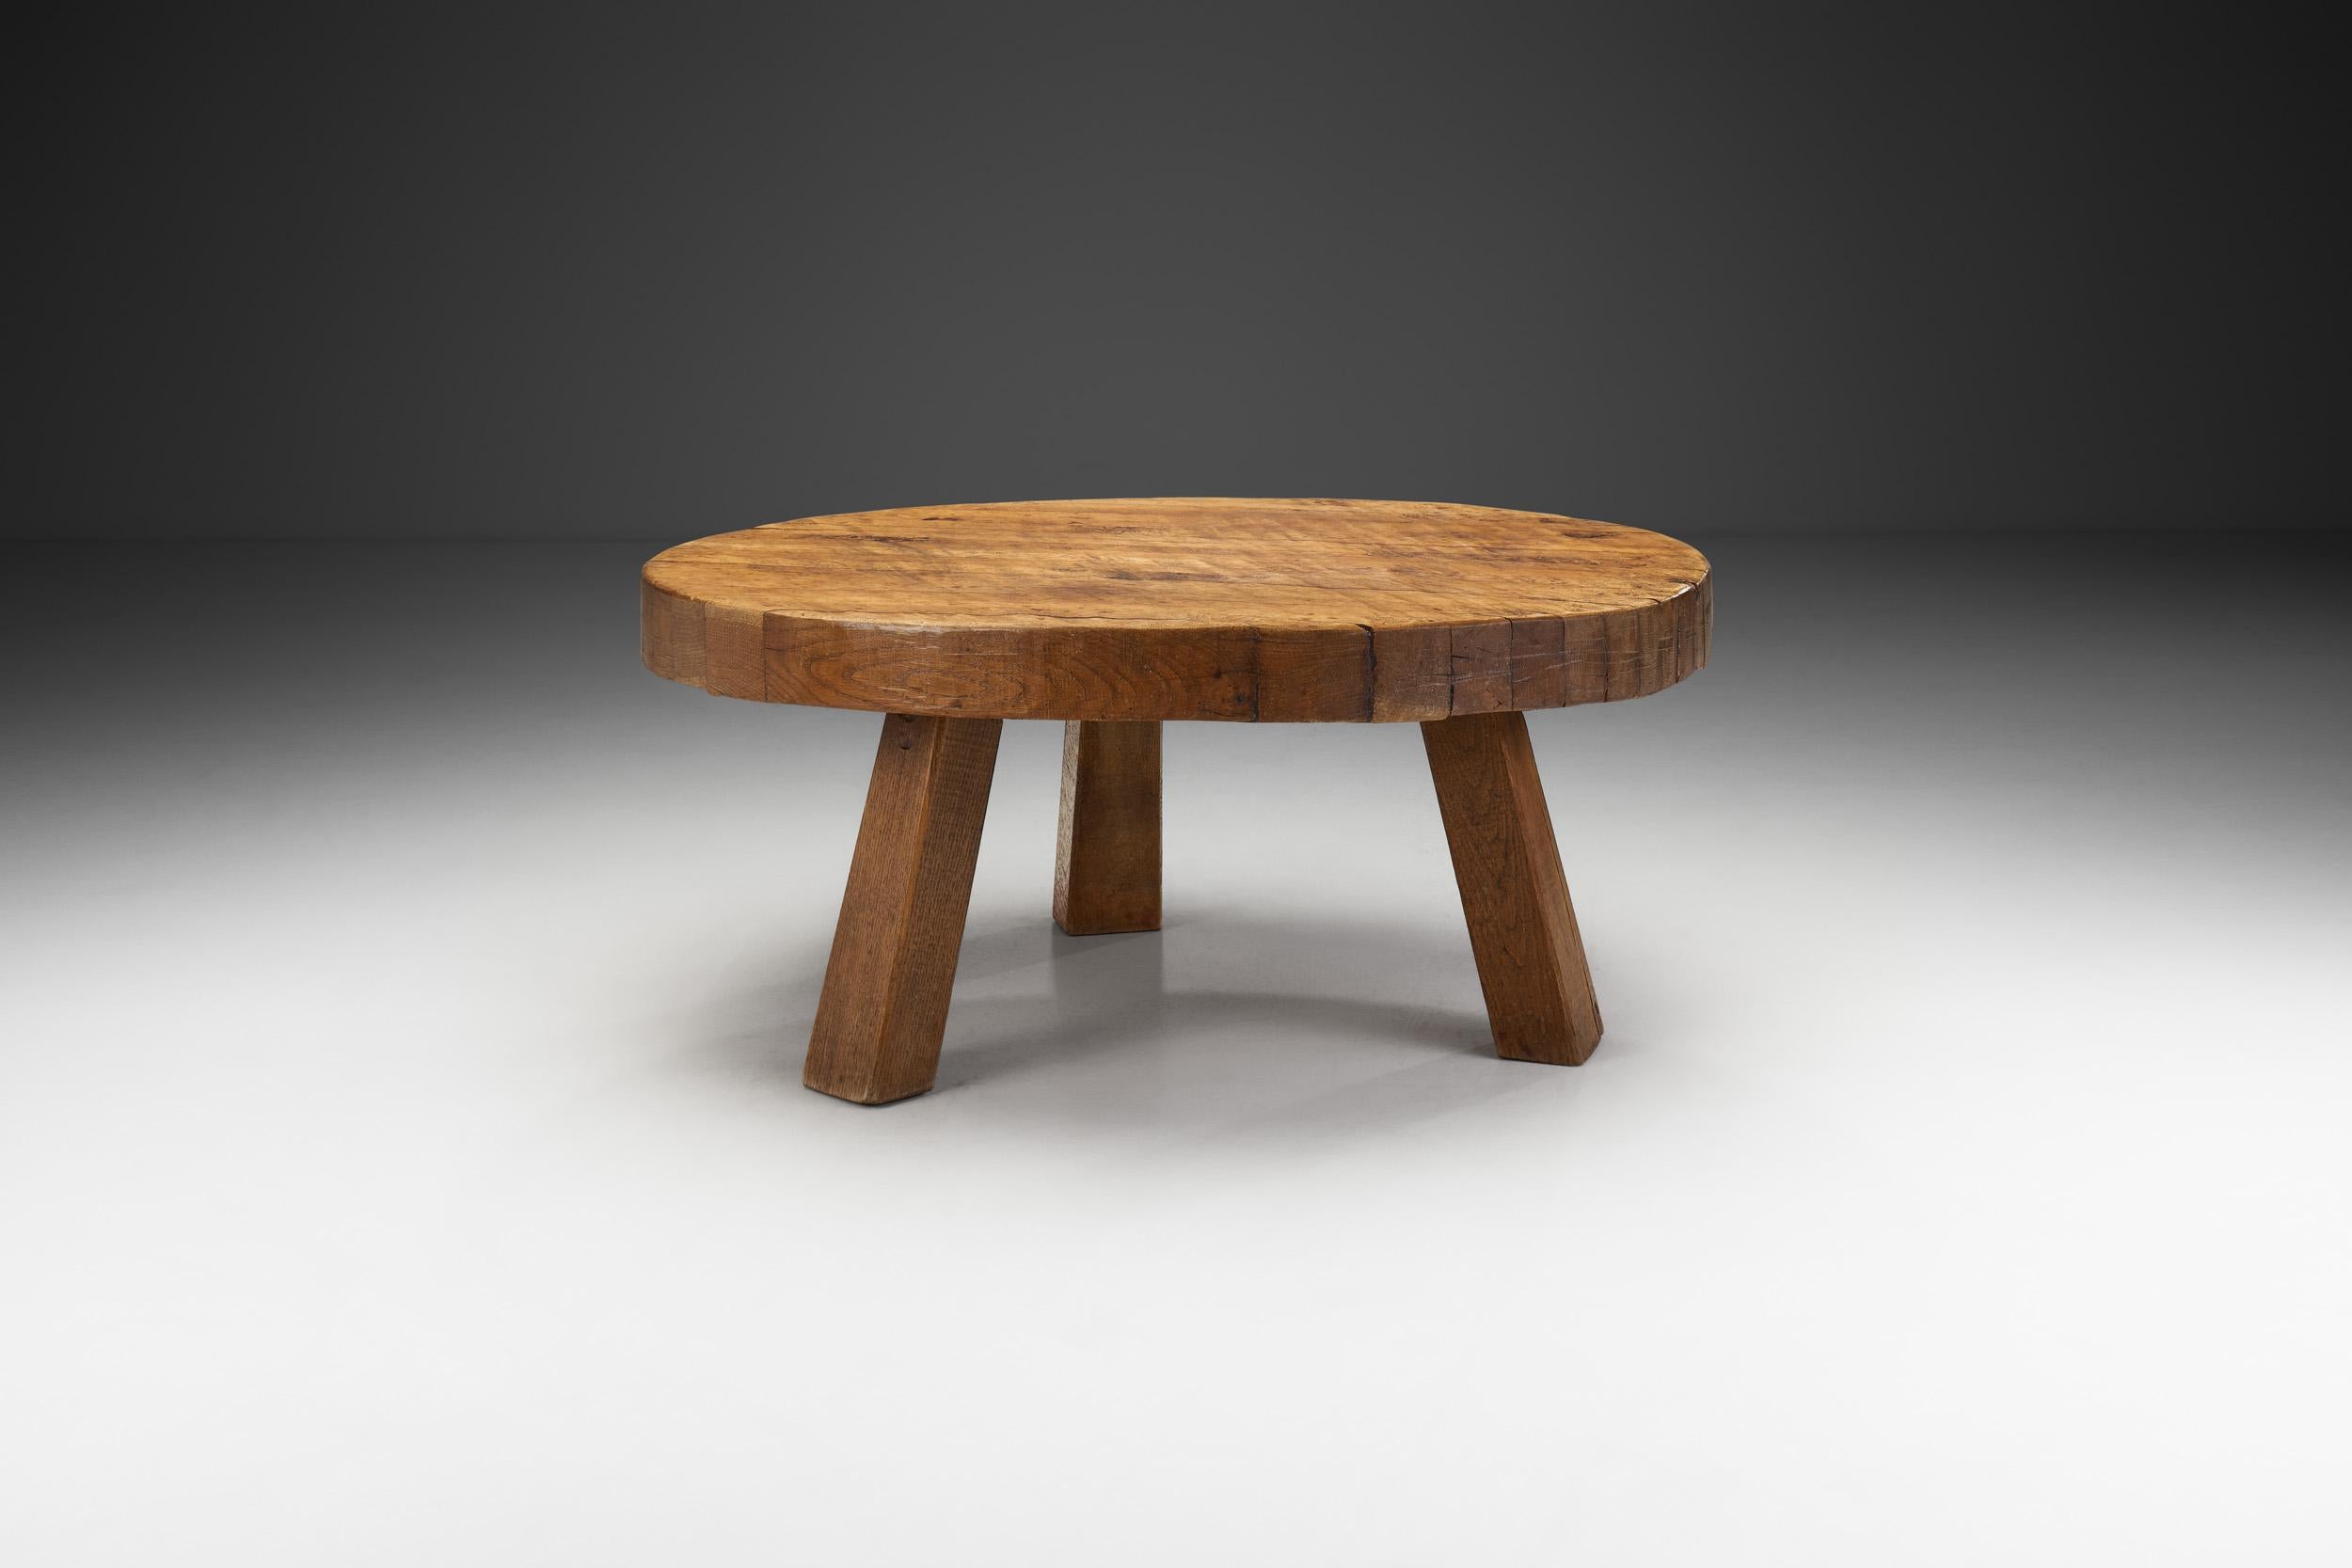 In most European mid-century design, there was an early emphasis on wood as it connected everyday objects, such as furniture to nature. This rustic, solid oak coffee table is a perfect example of this sentiment, and the visual benefits of an